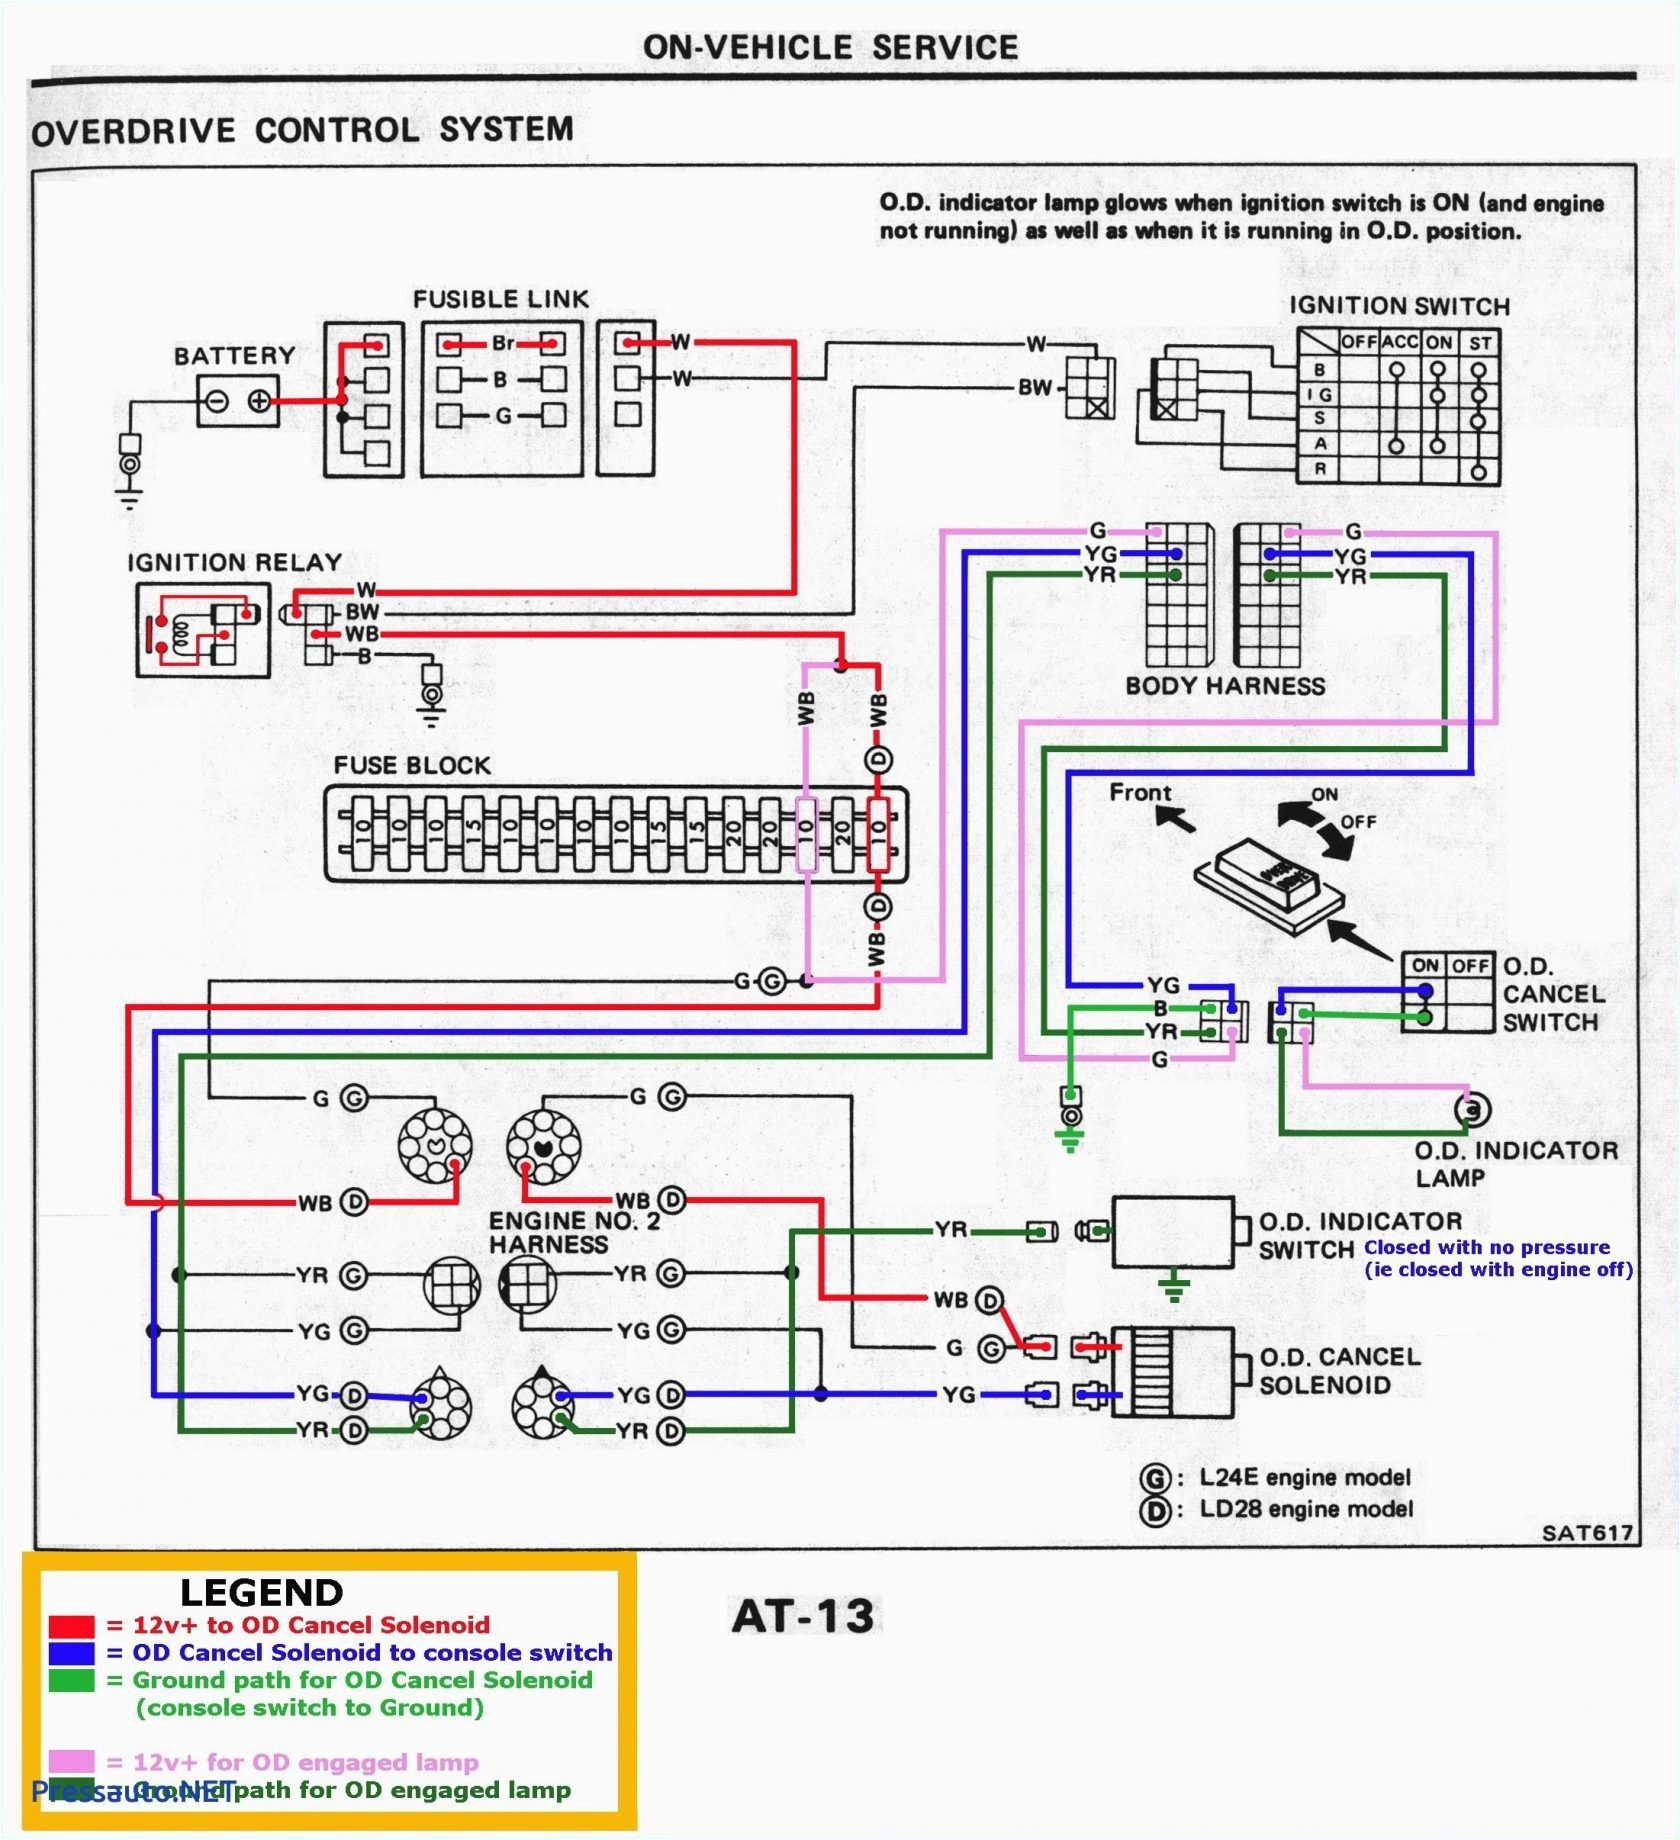 2001fordfocusradiowiring have included a diagram of the radio 2001fordfocusradiowiring have included a diagram of the radio